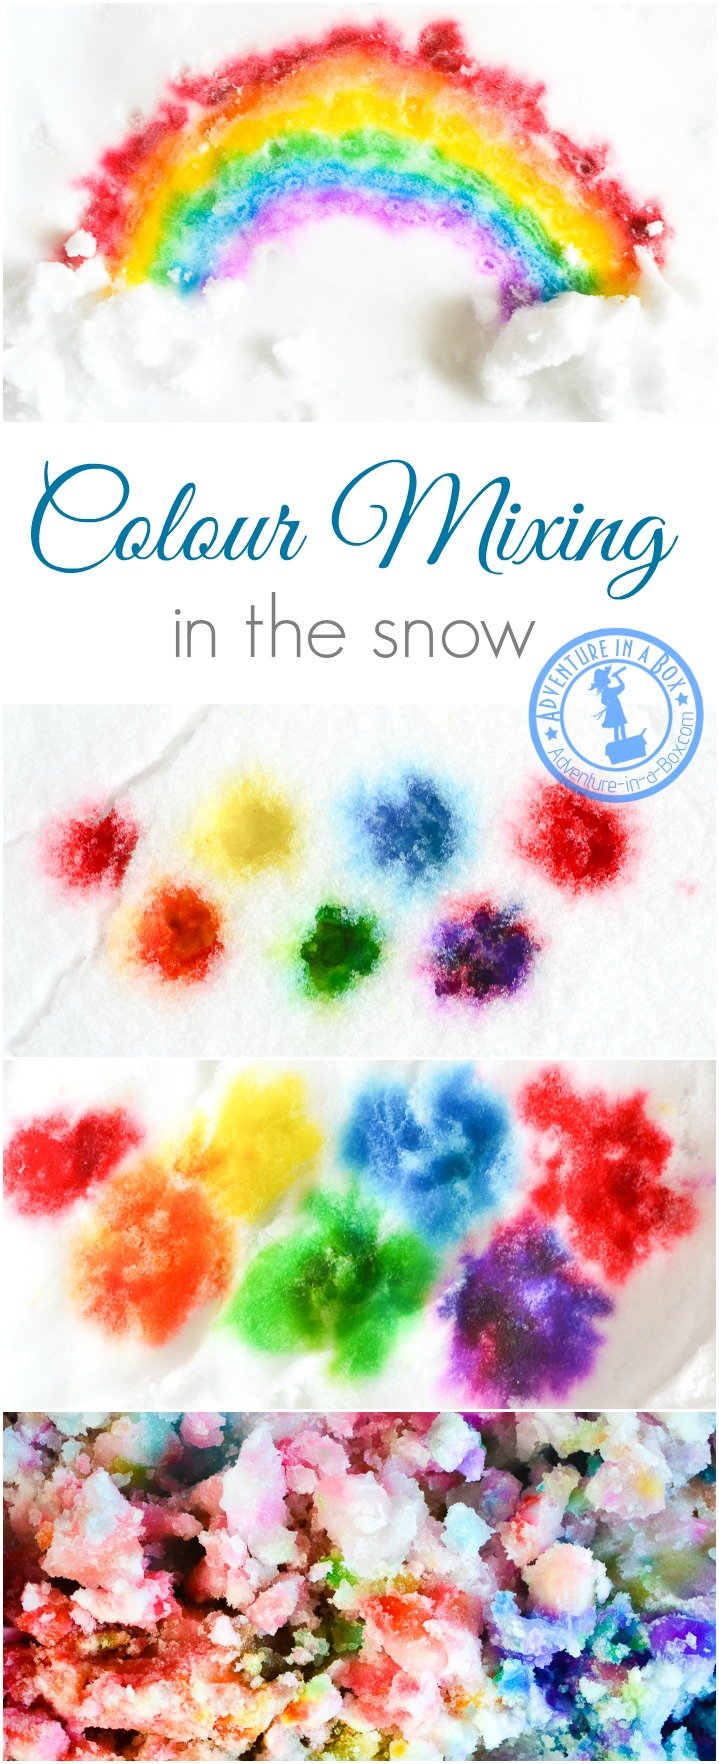 When it's too cold to play with snow outside, bring it inside and open a colour mixing lab with paints in the snow. Fun winter art project for kids!